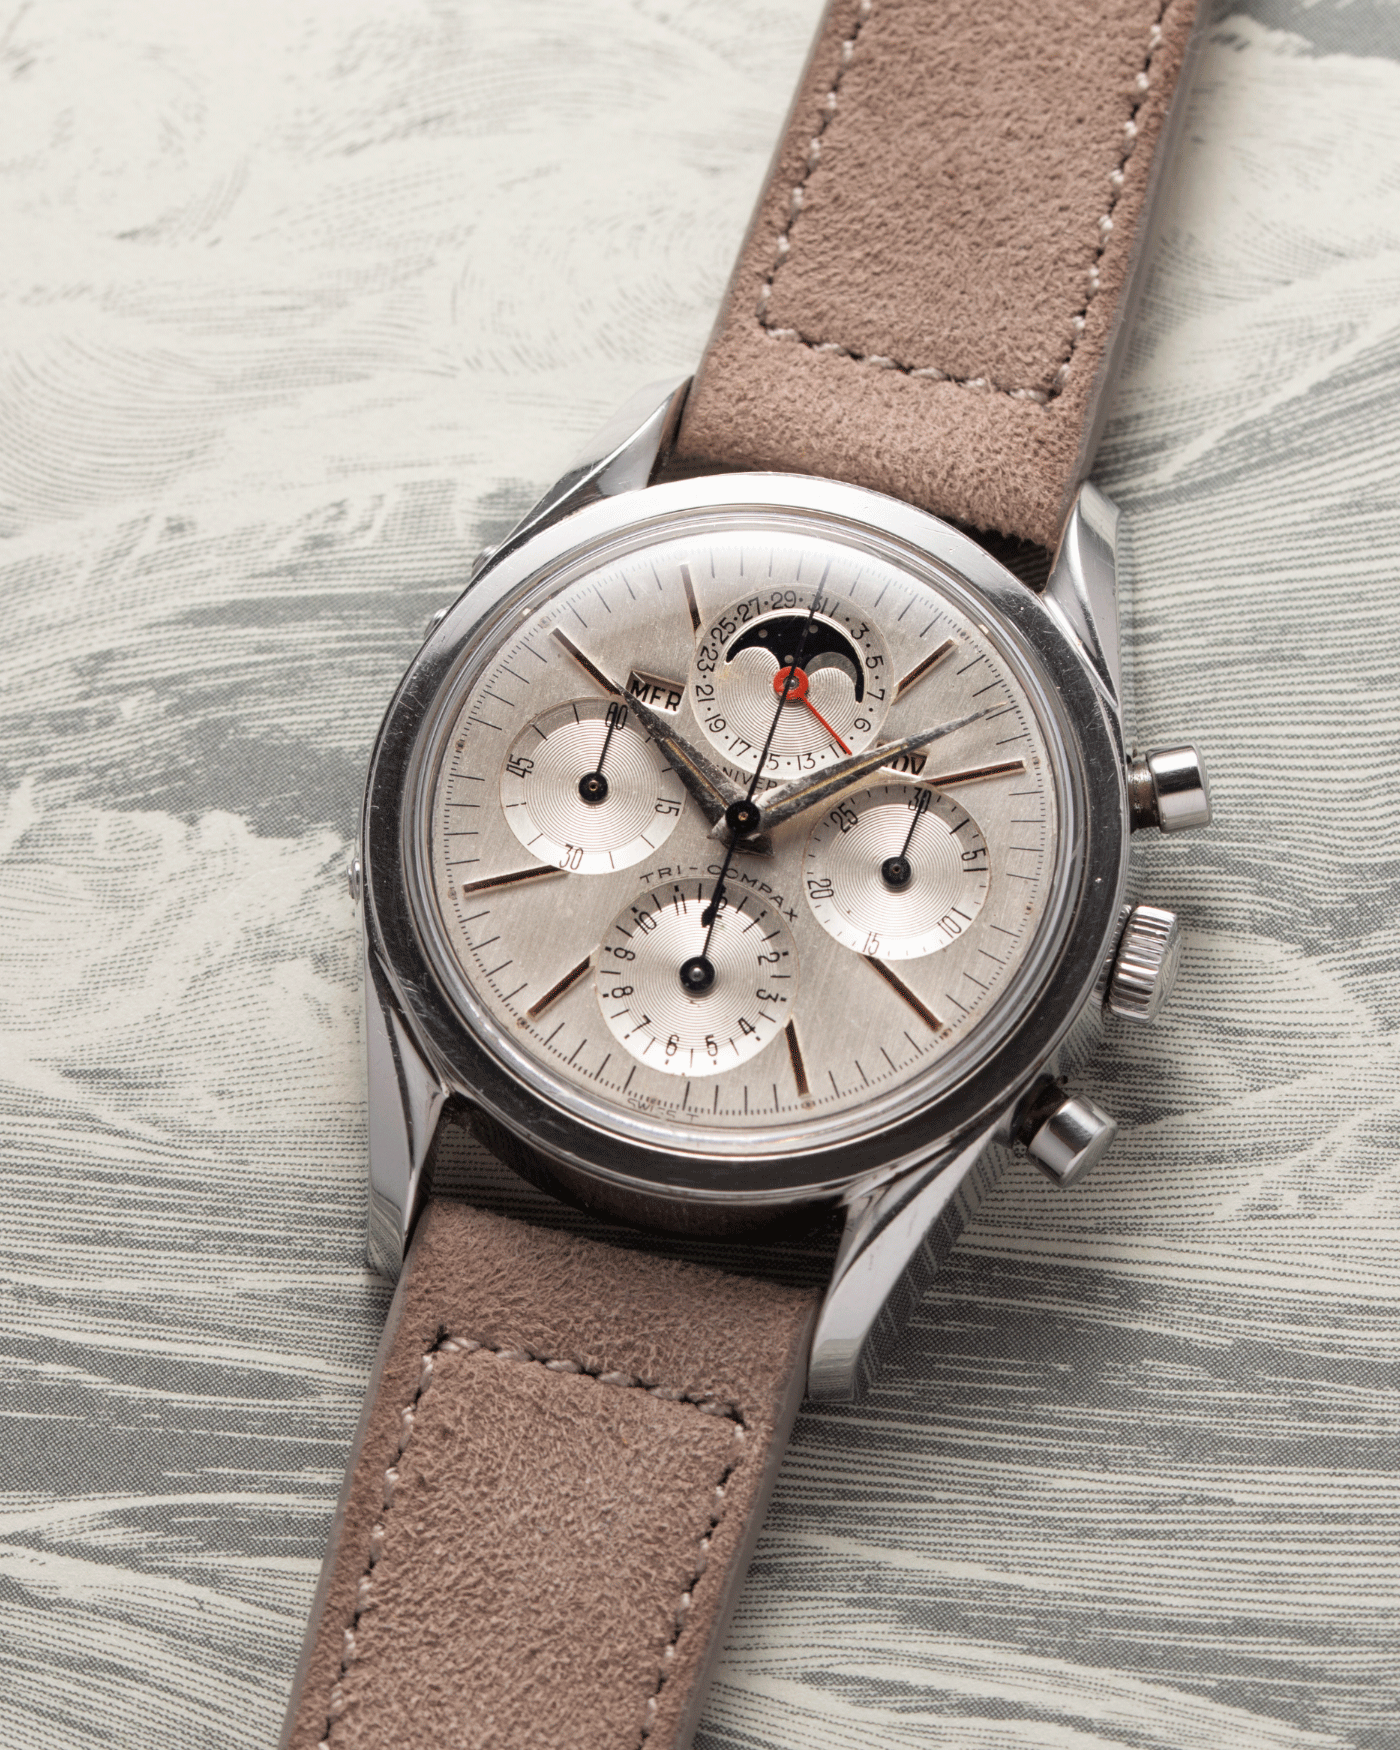 Brand: Universal Geneve Year: 1960’s Reference Number: 222100 Material: Stainless Steel Movement: Cal. 281 Case Diameter: 36mm Lug Width: 18mm Strap: Molequin Taupe Nubuck and Stainless Steel Buckle